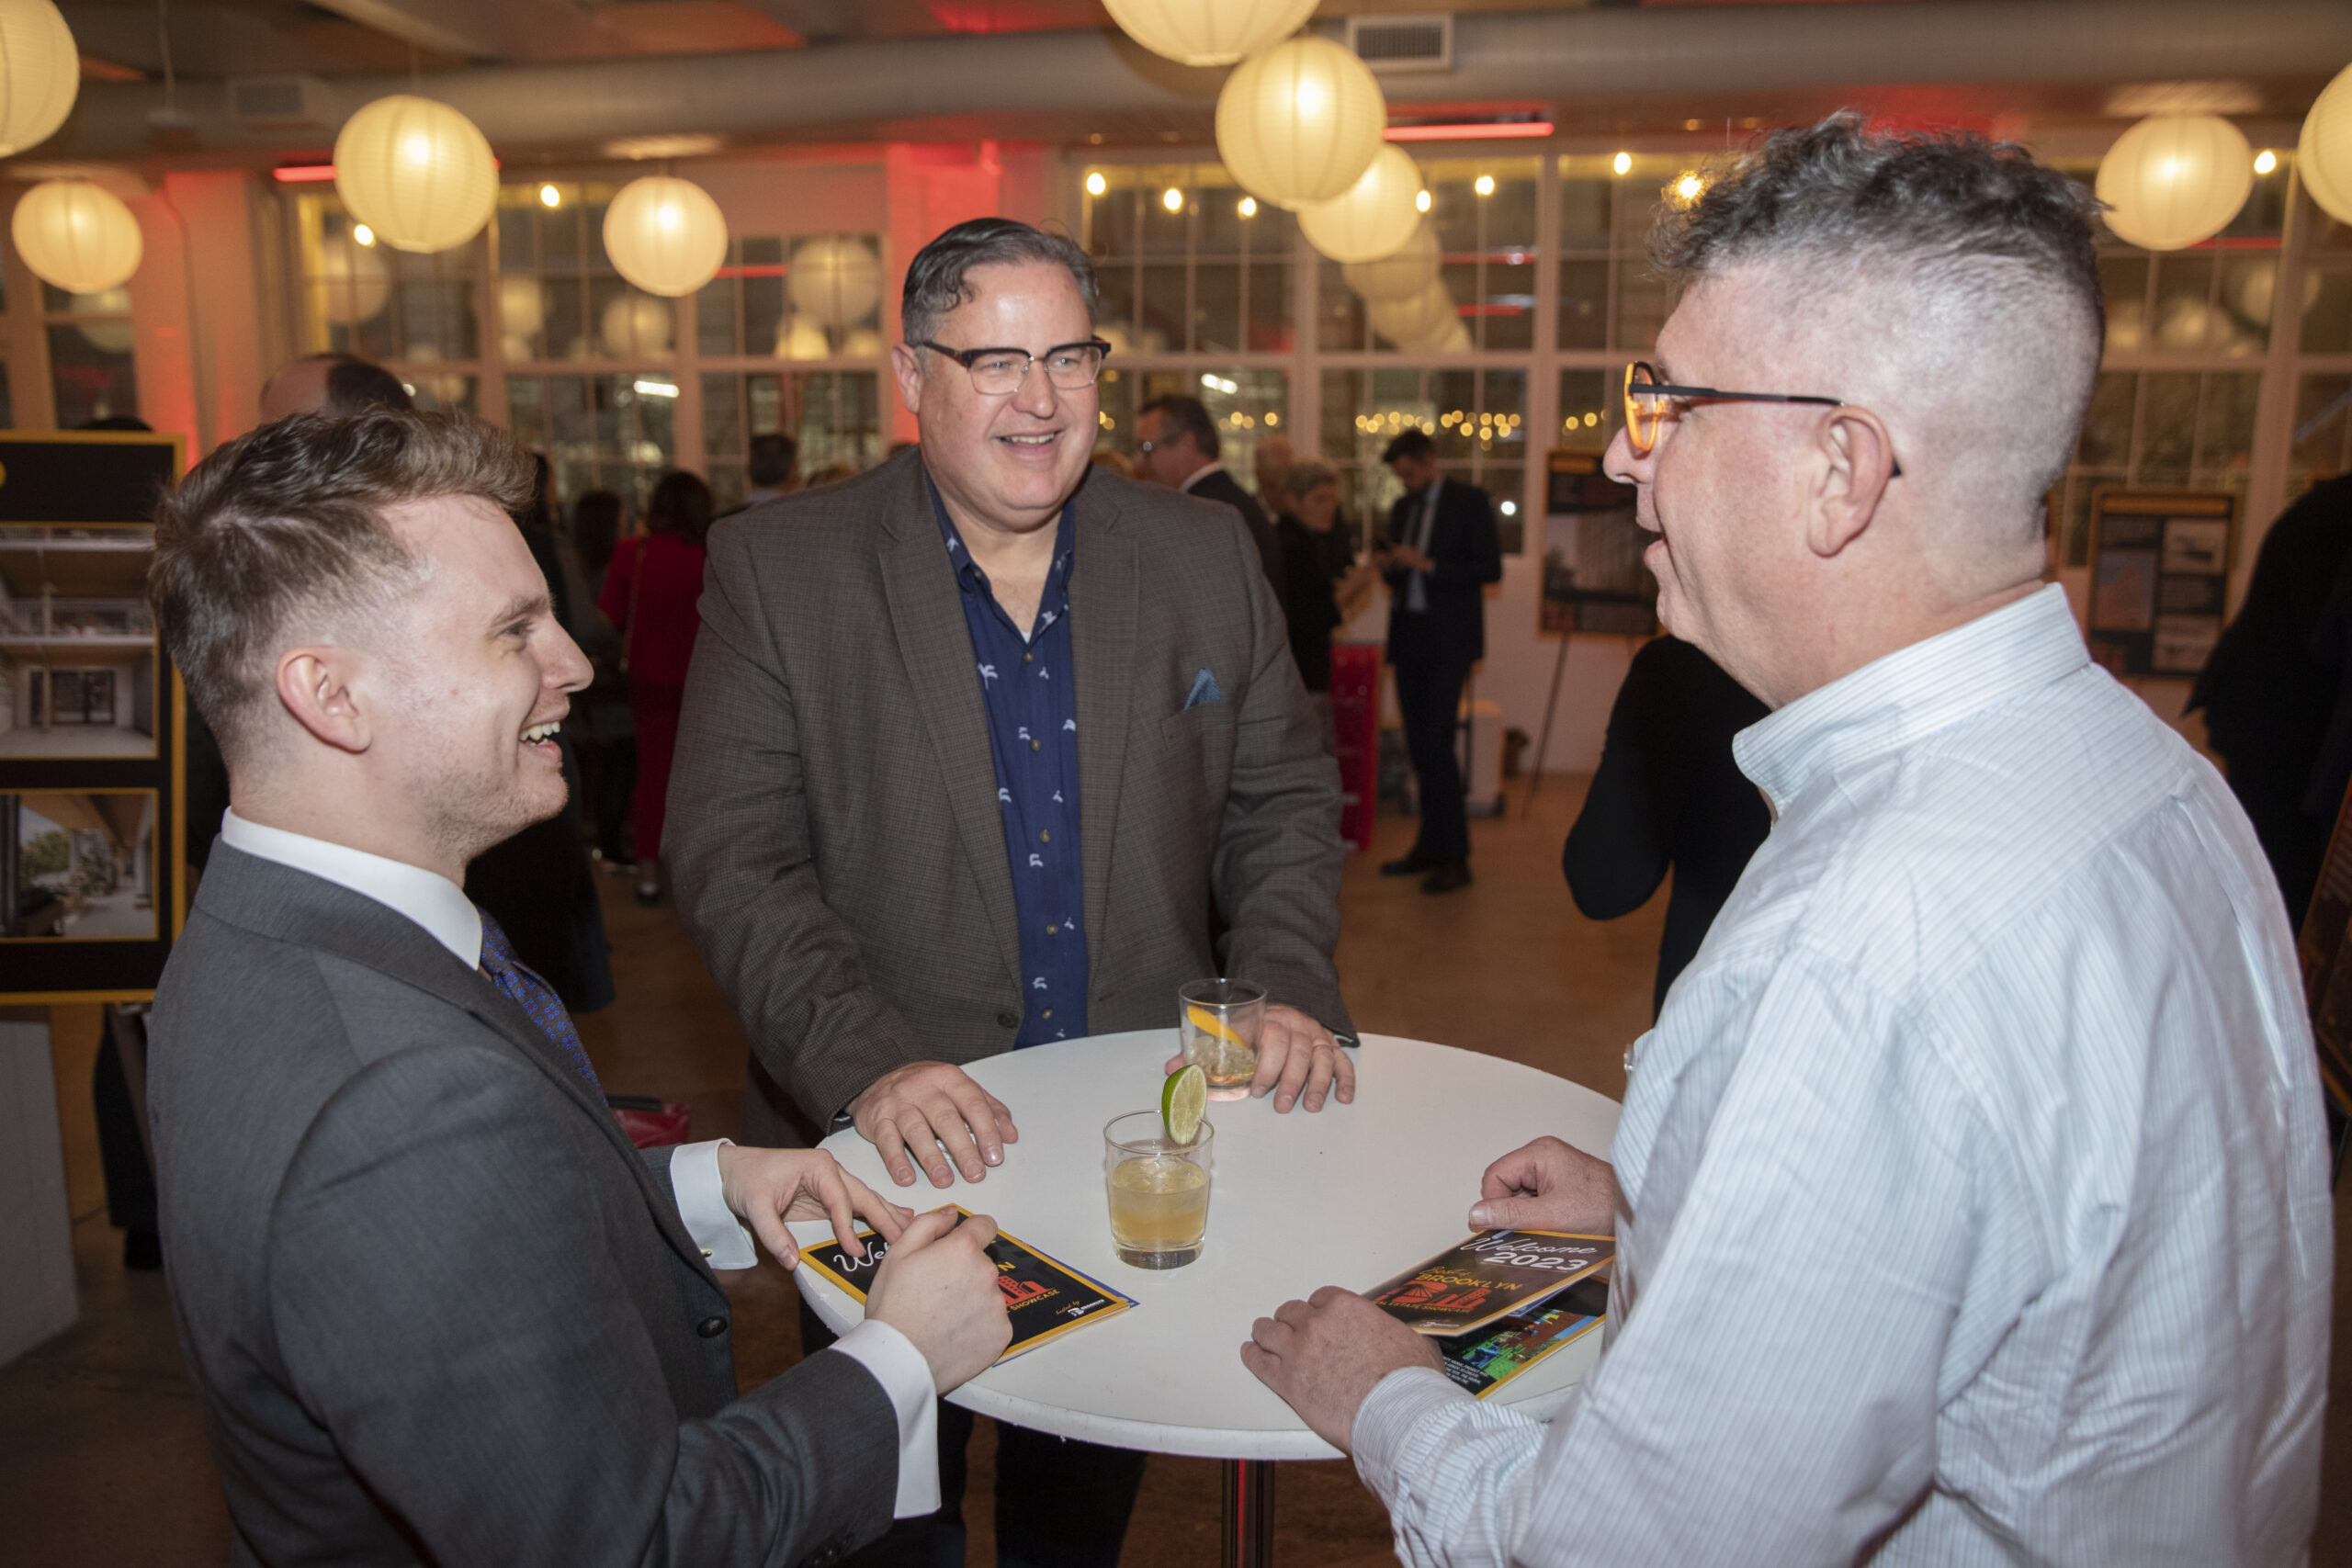 Paolo Hockenmaier, John McEvoy and another guest at Best of Brooklyn Real Estate Showcase.